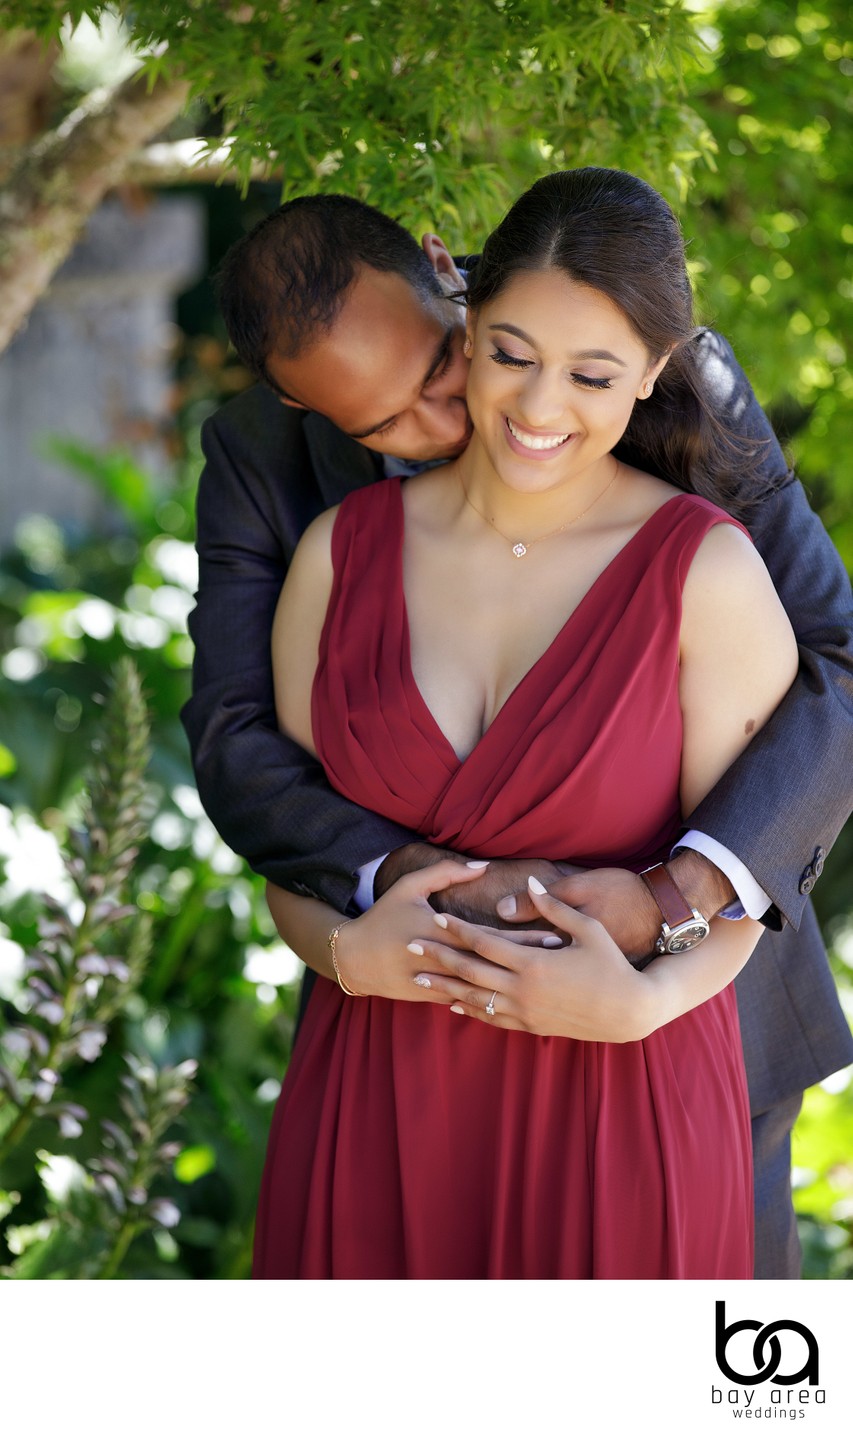 Engagement Photography in San Francisco Bay Area